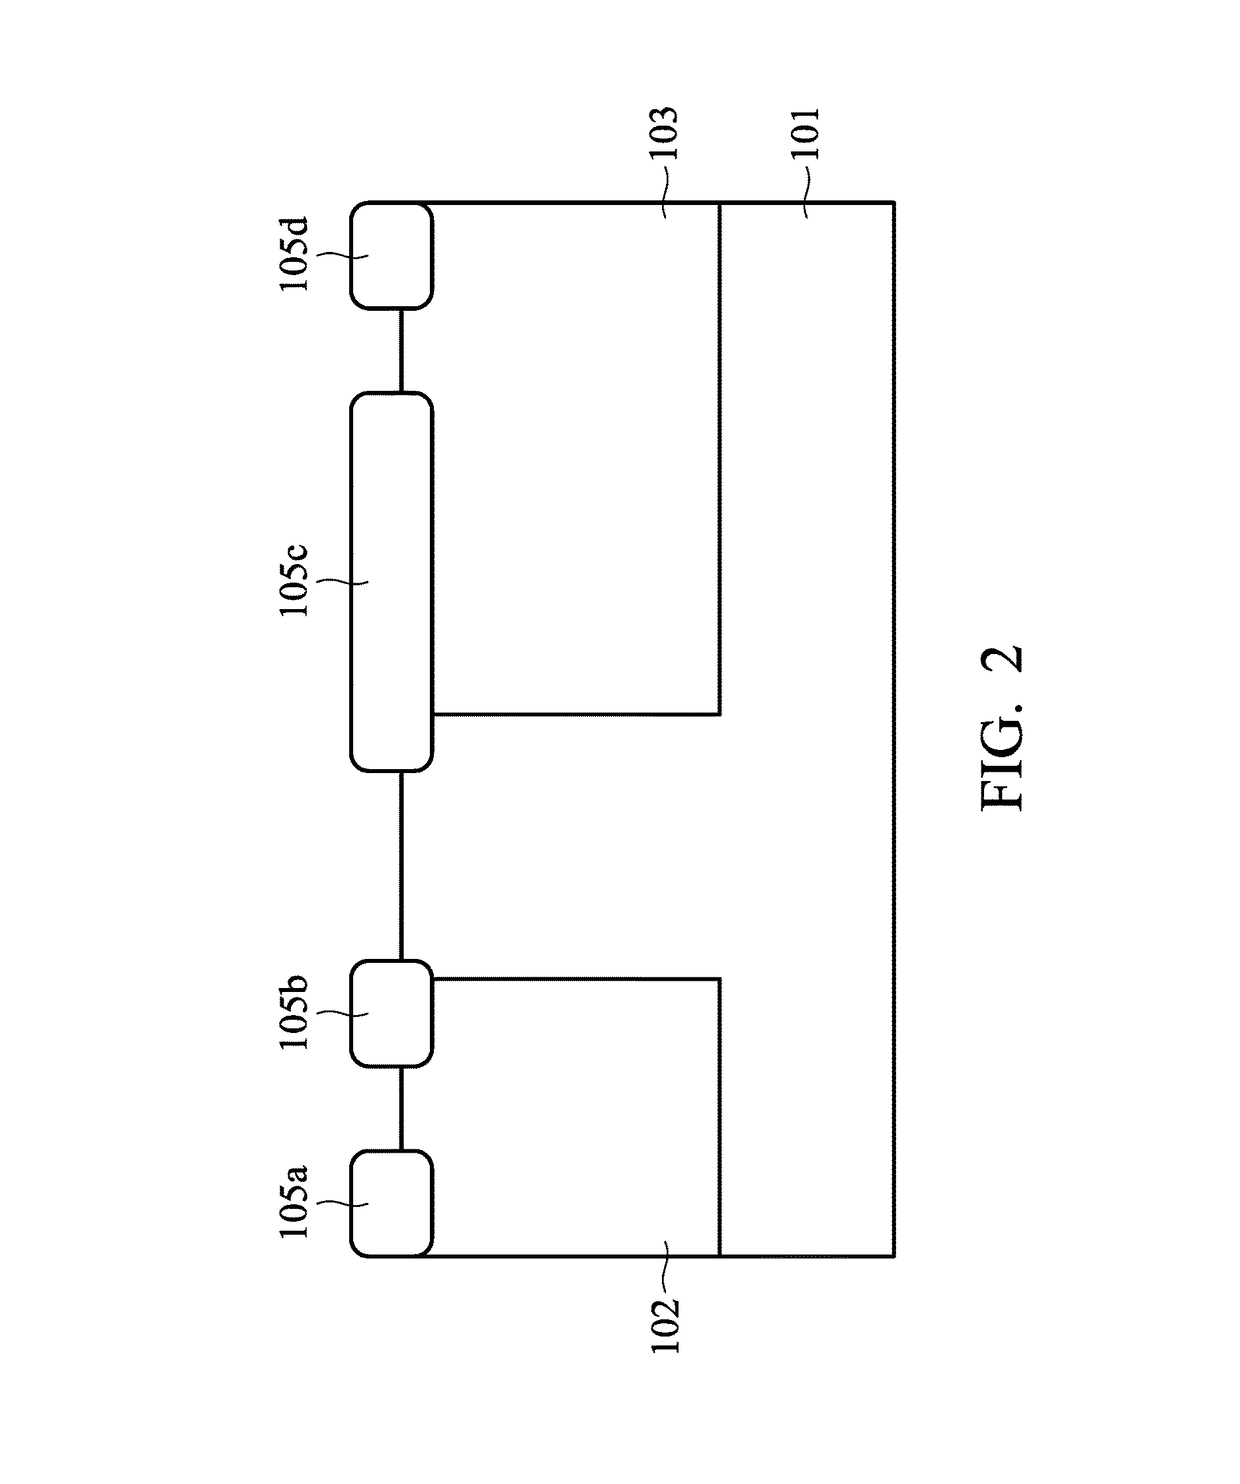 Junction field effect transistor (JFET) with first and second top layer of opposite conductivity type for high driving current and low pinch-off voltage